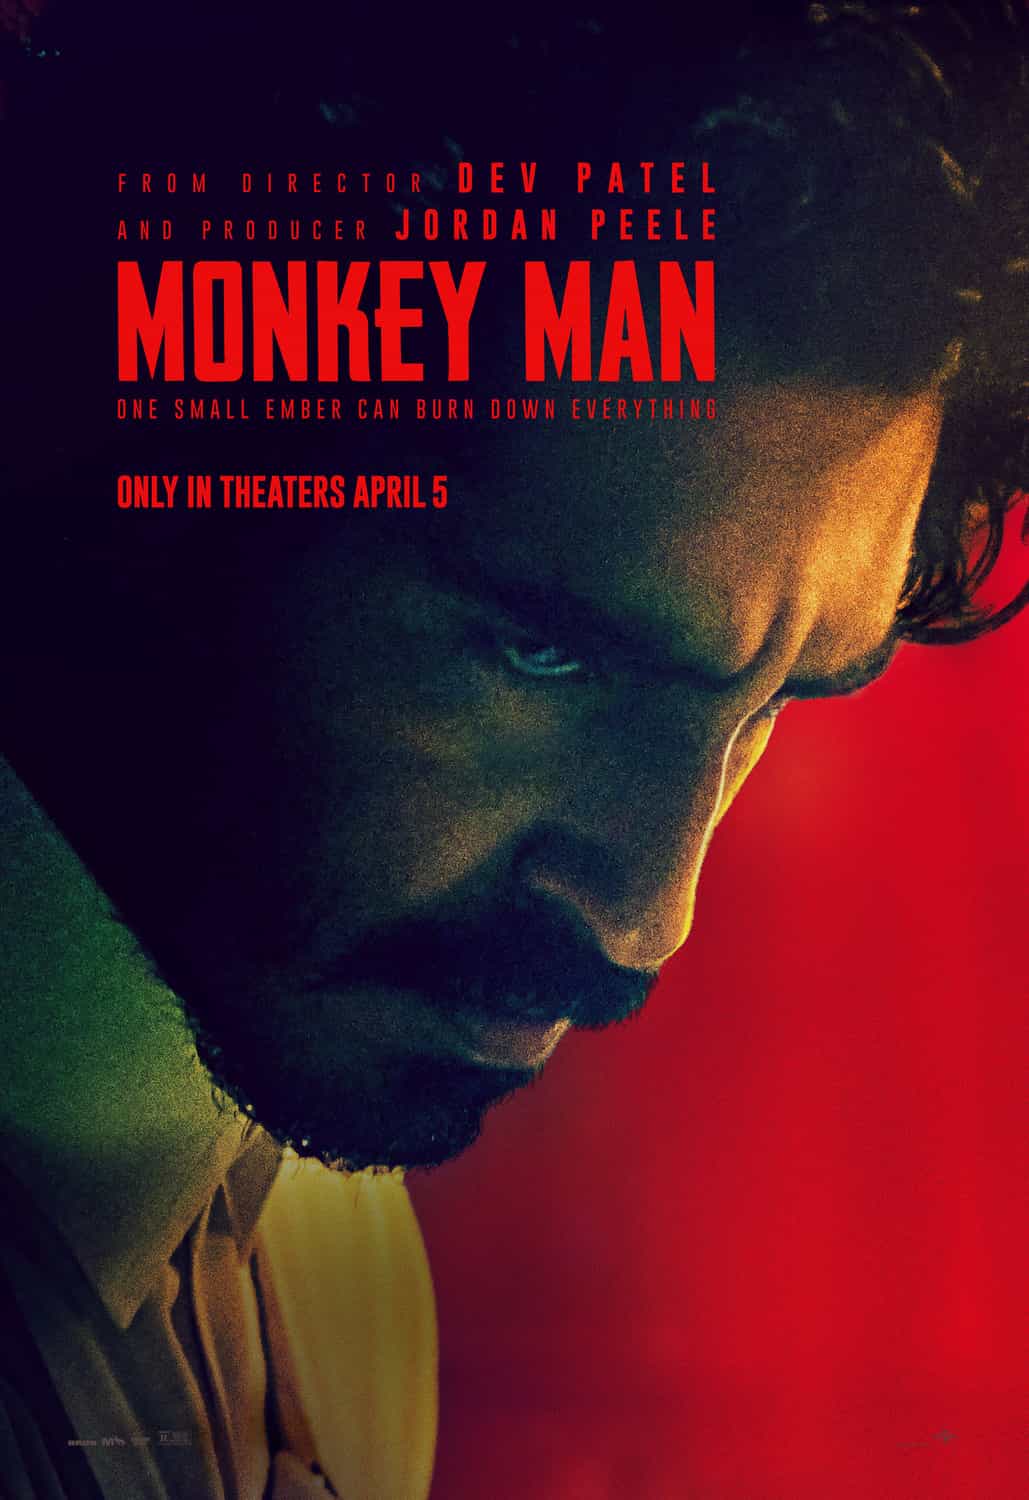 Monkey Man is given an 18 age rating in the UK for strong bloody violence